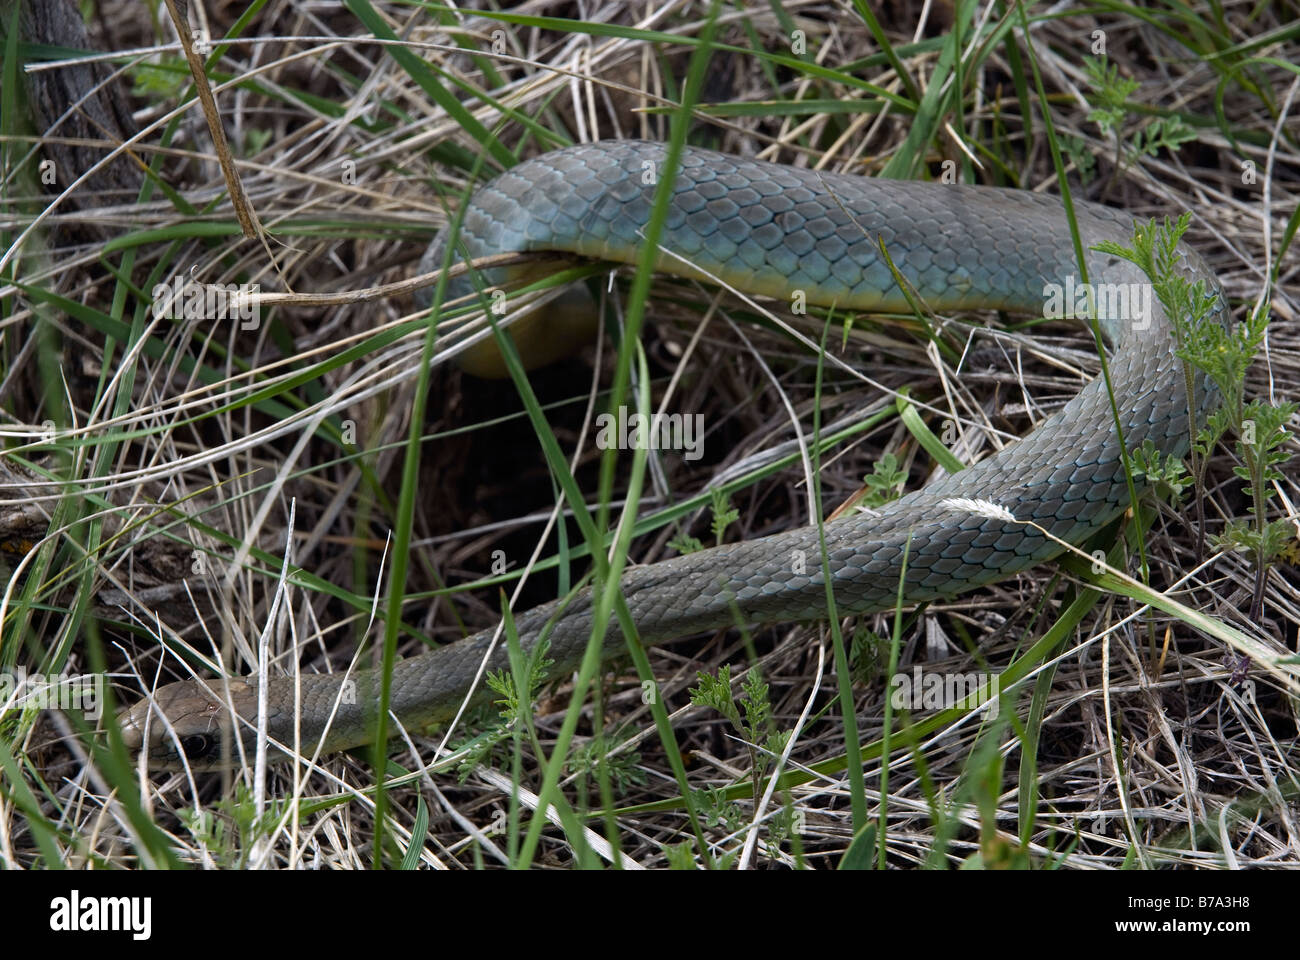 Eastern Yellow bellied Racer Coluber constrictor flaviventris Stock Photo